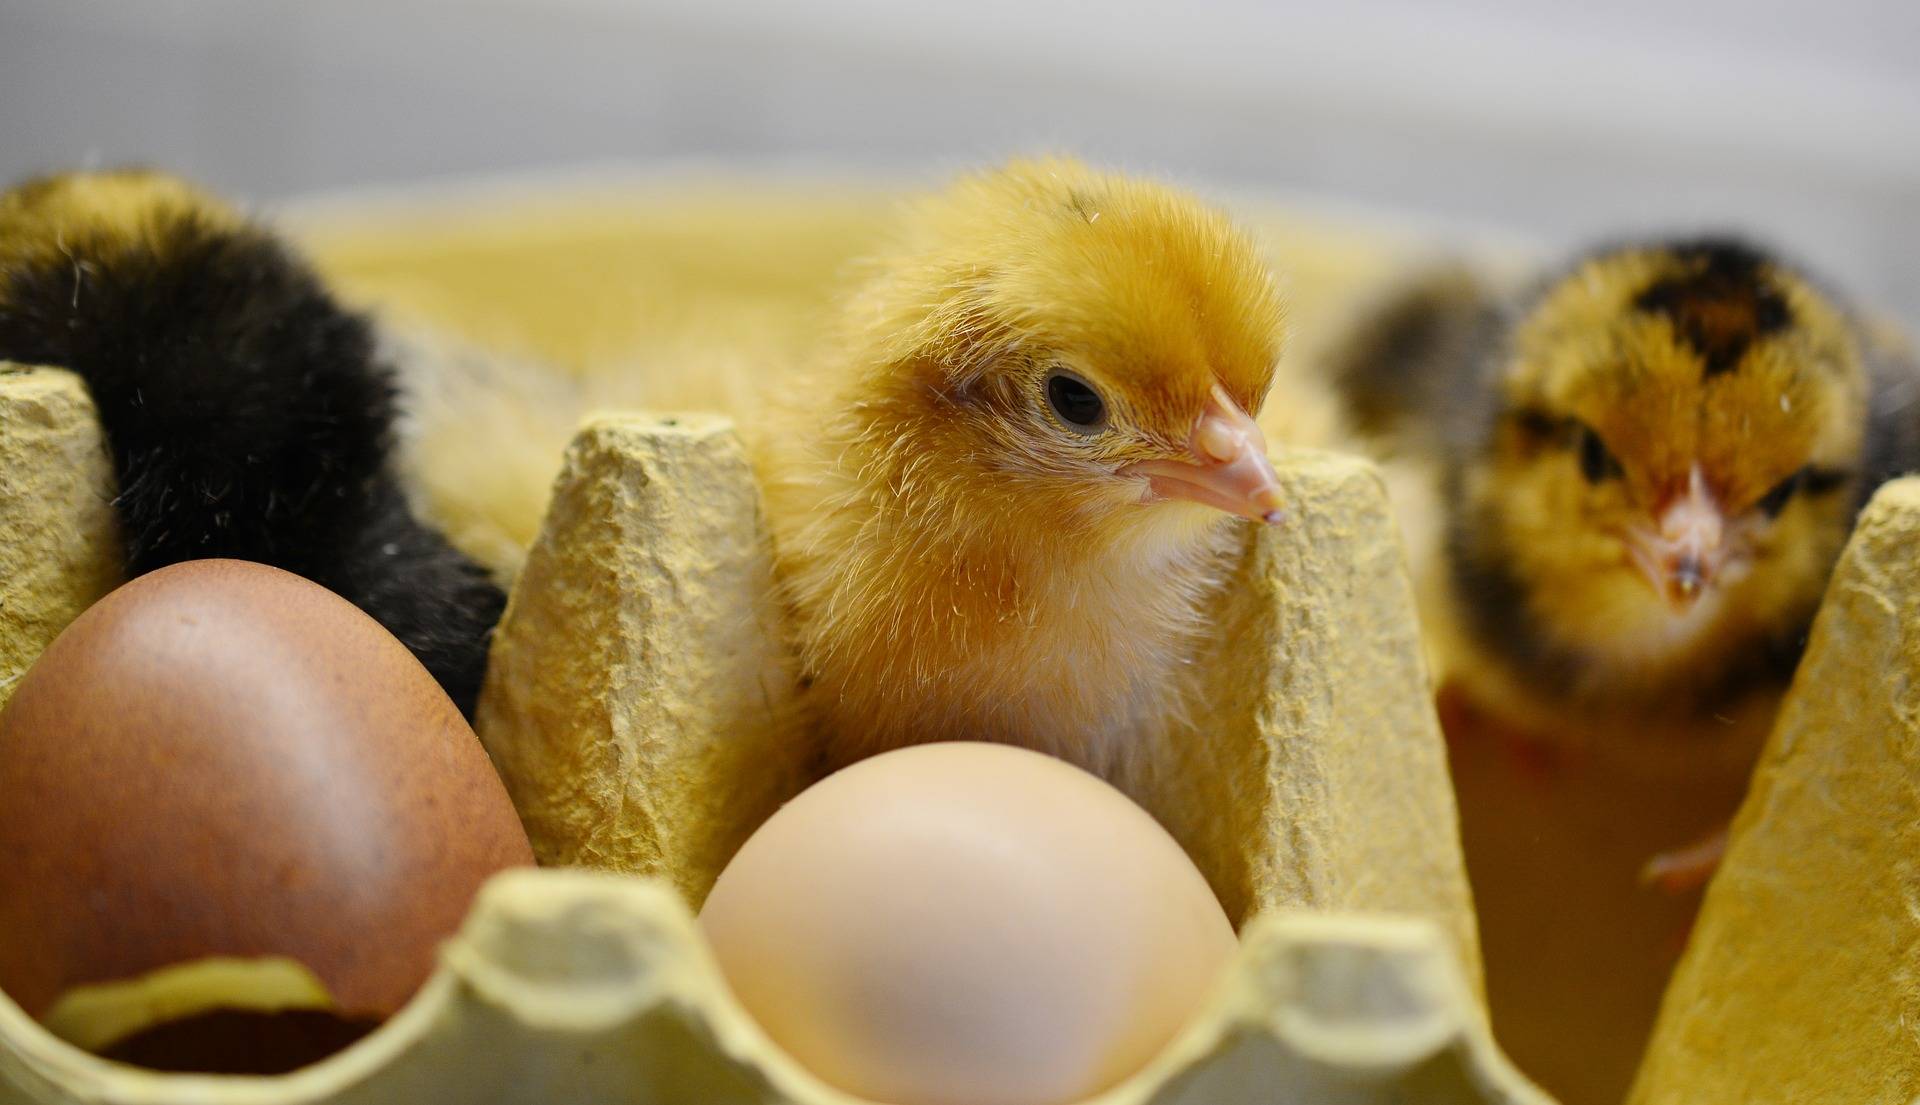 Hints for Hatching and Raising Chickens out of Eggs